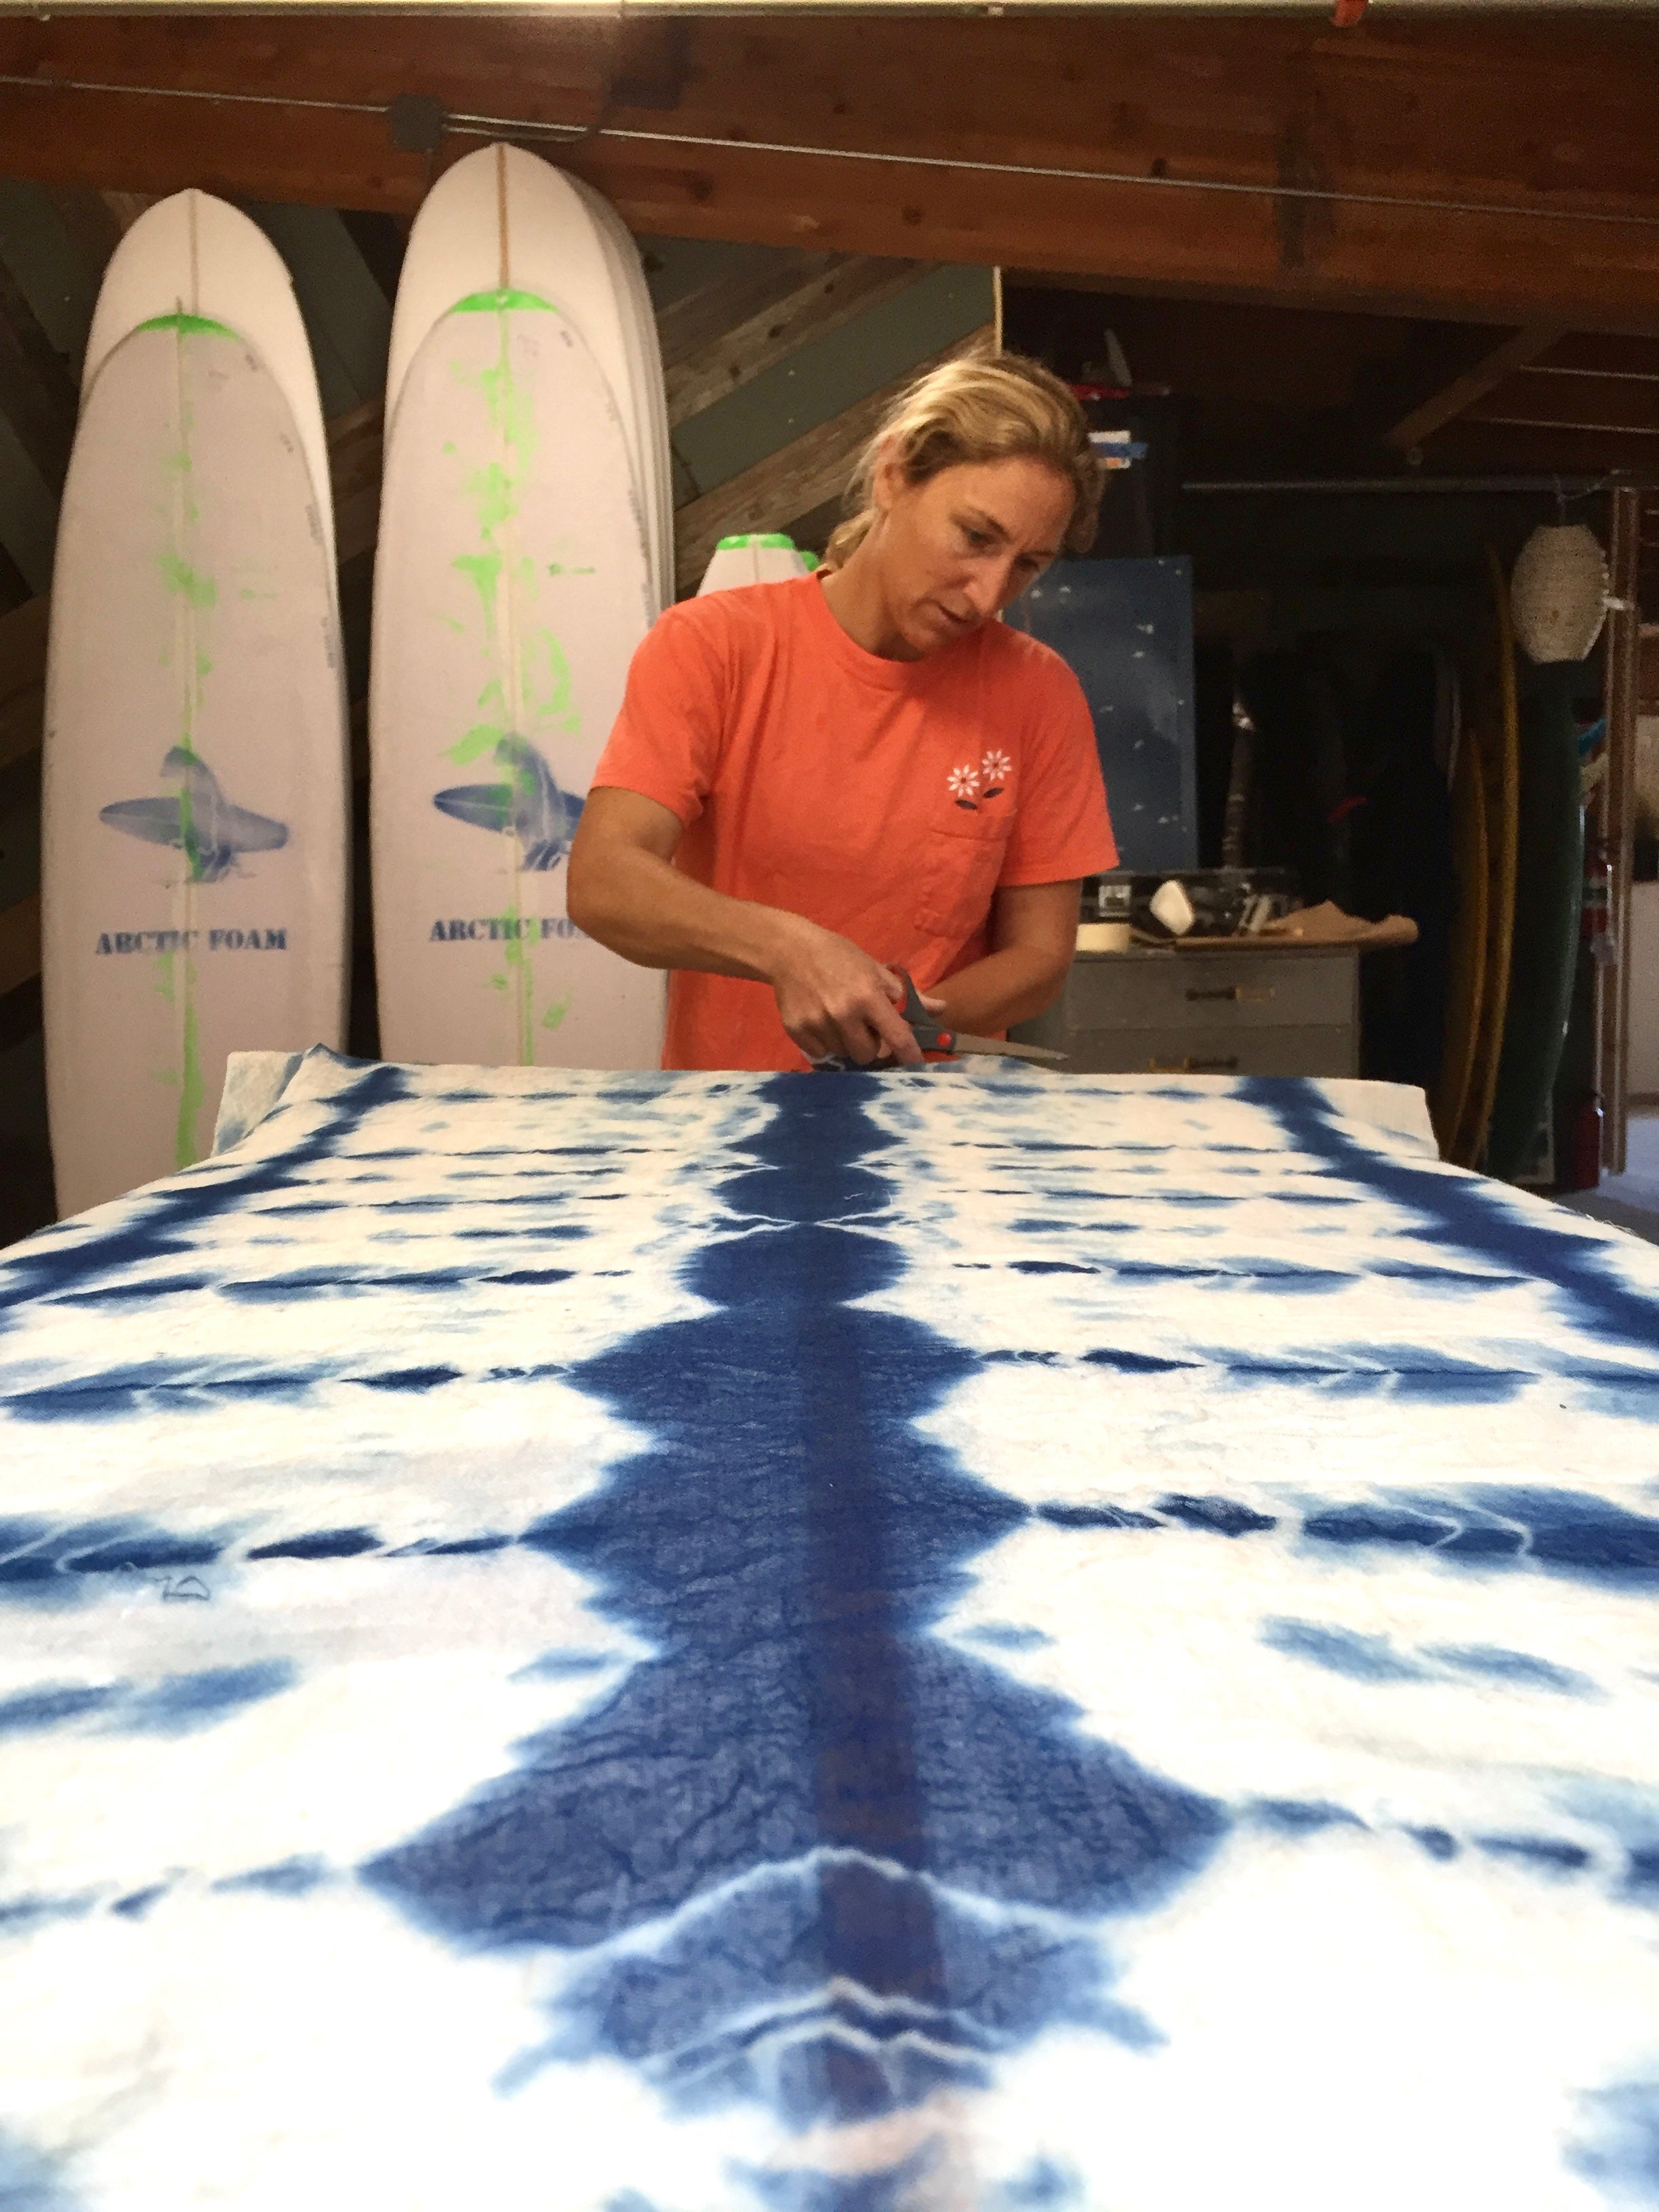 Ashley cutting Margaret's hand dyed indigo fabric for her surfboard